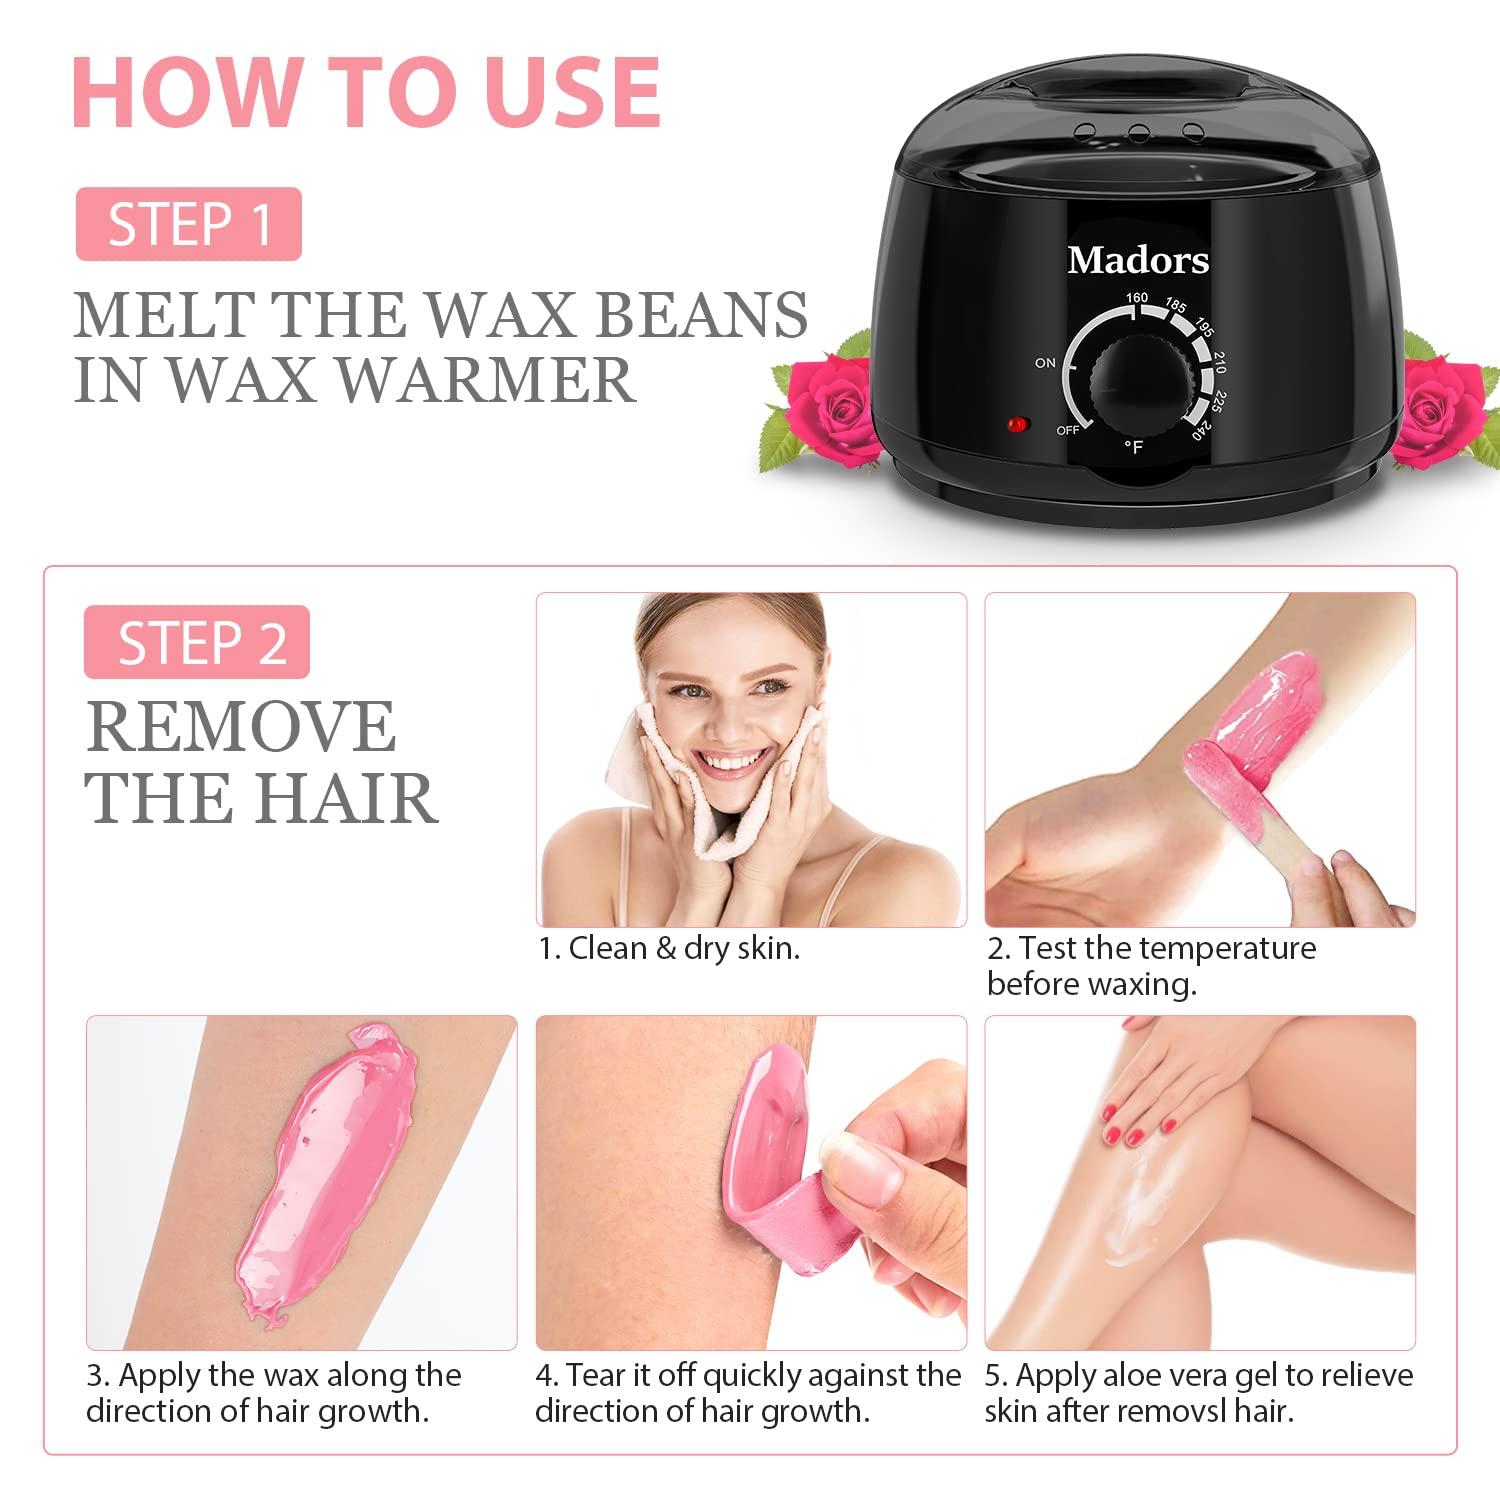 How to Melt Hard Wax Beans: Microwave, Stovetop & Wax Warmer